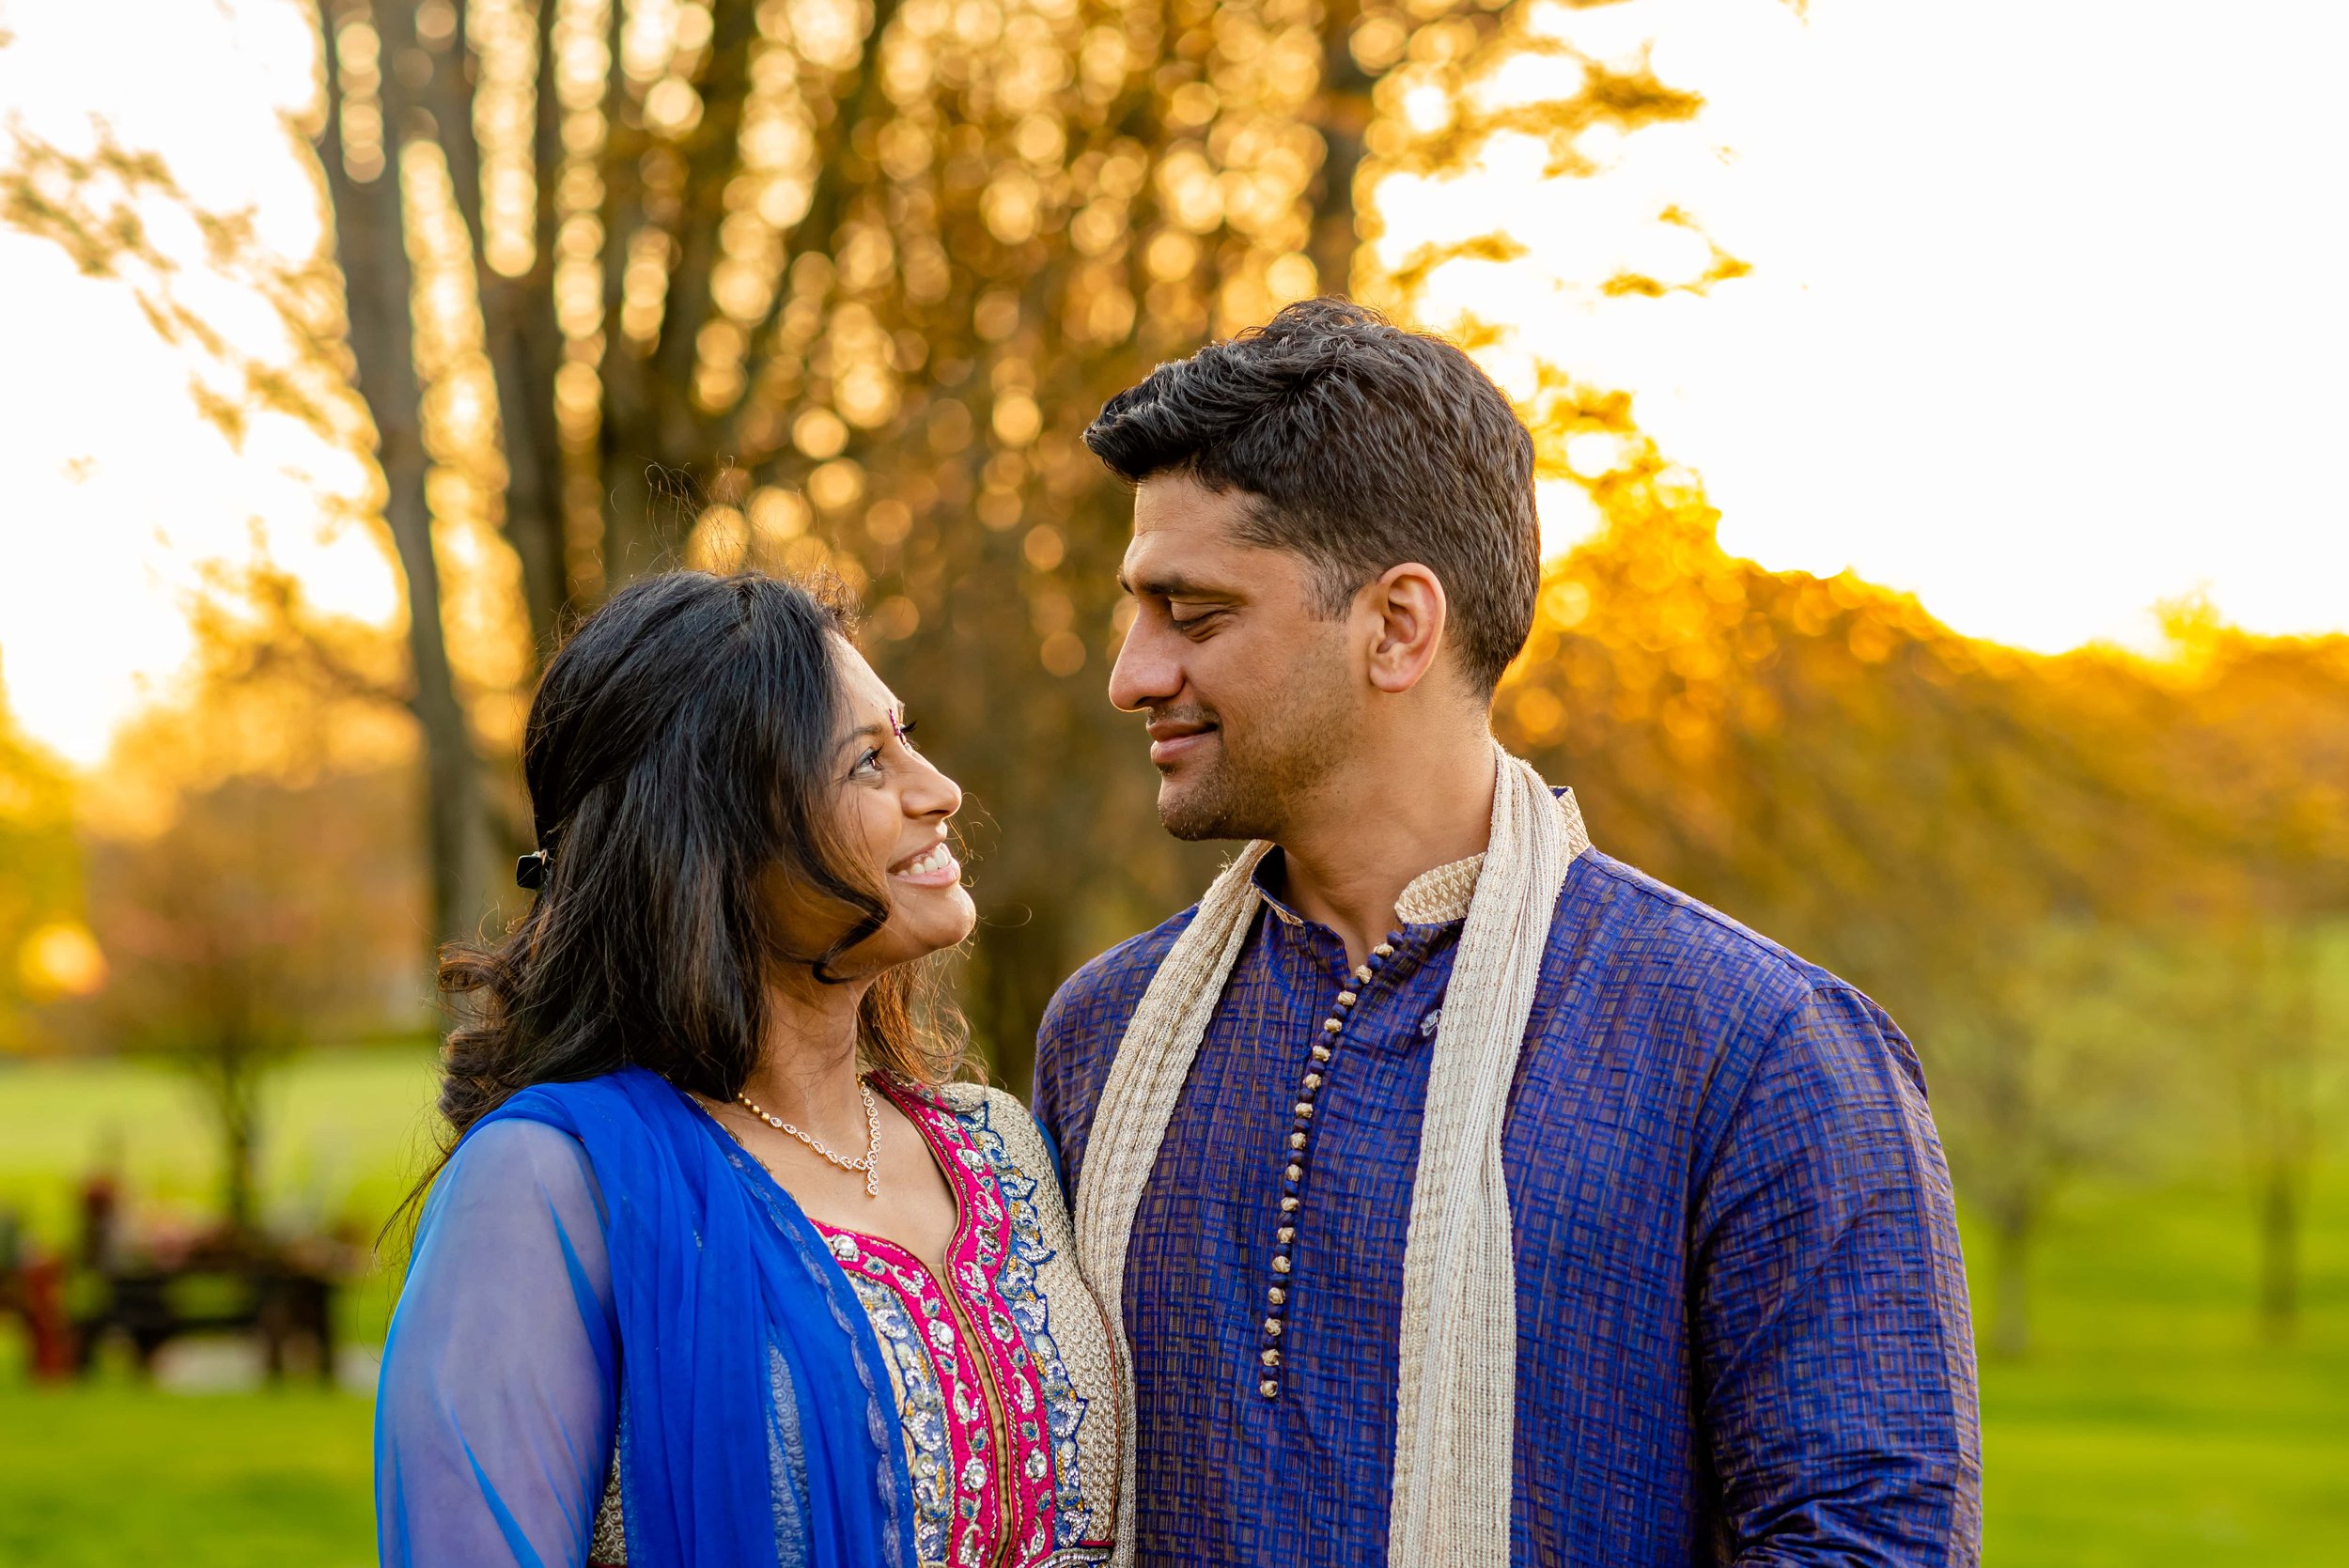 Maryland Couples Photographer - Indian Inspired image of a couple